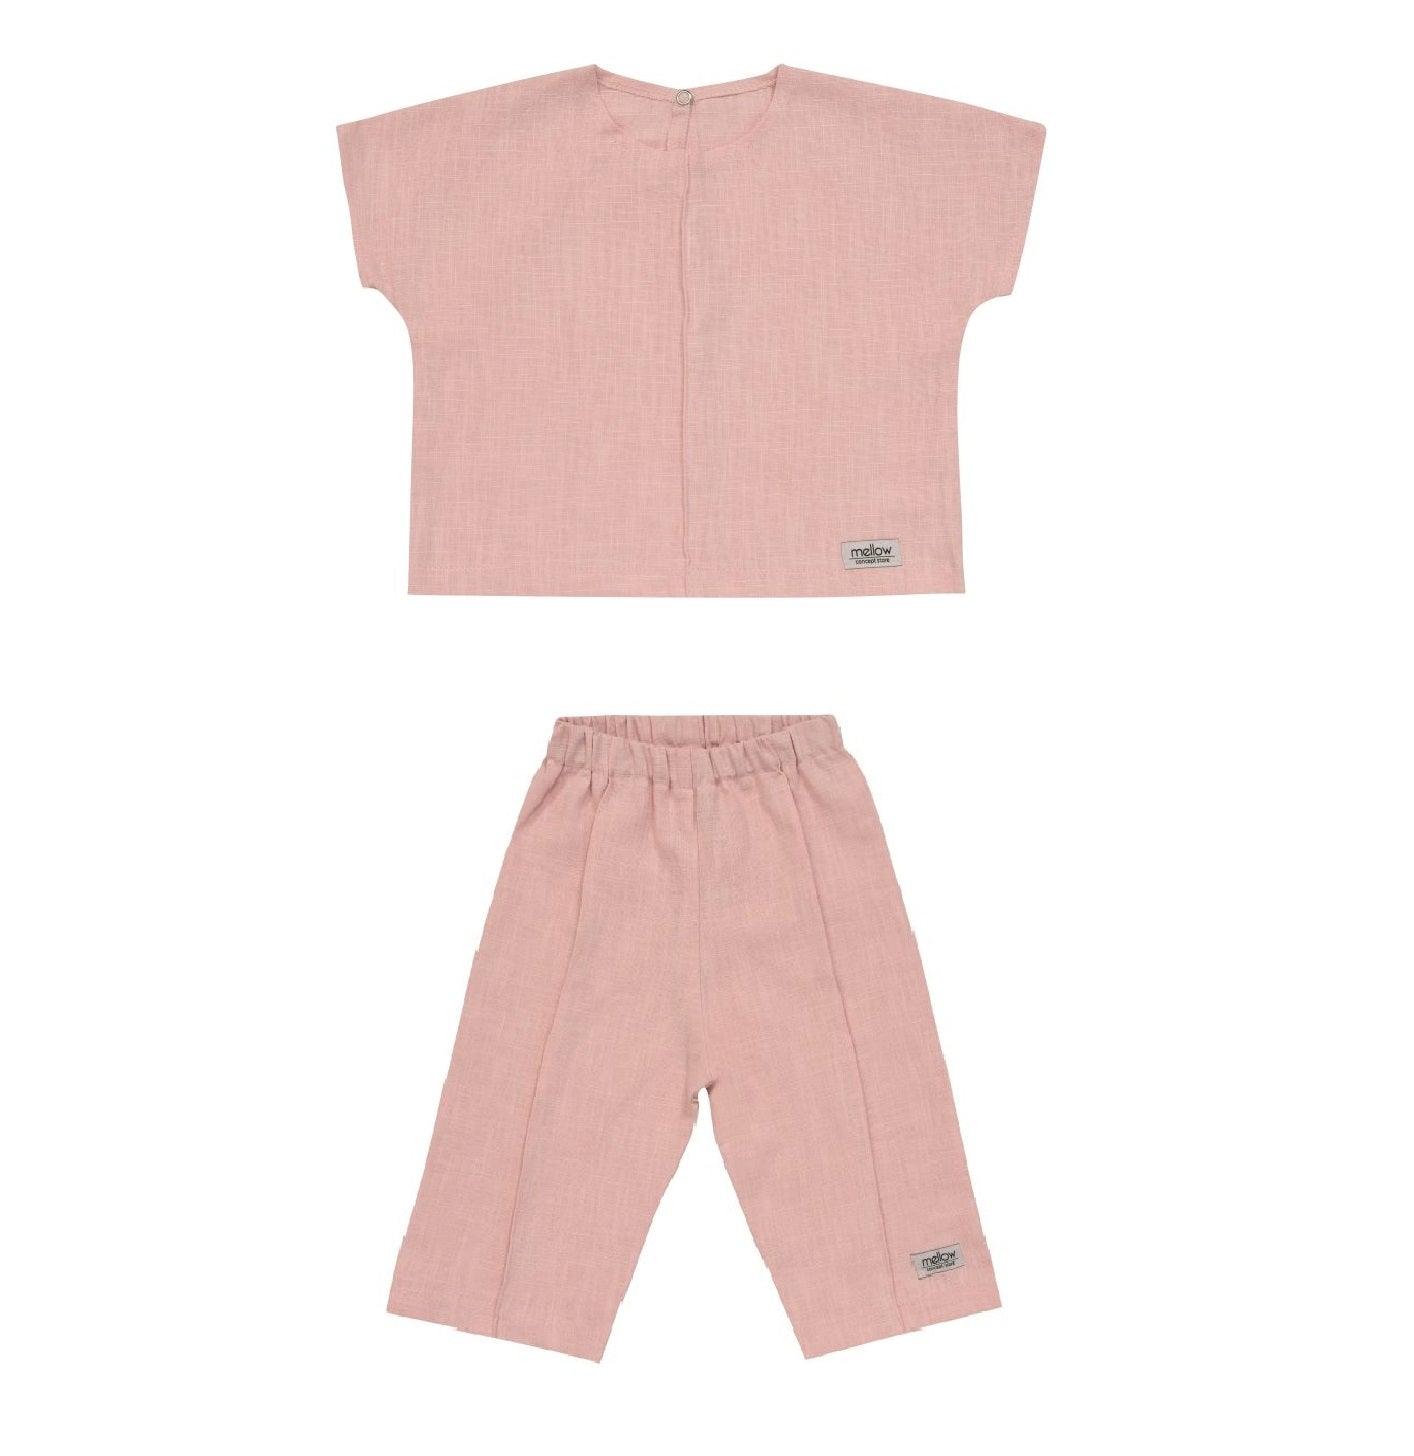 This Ramie Baby/Kid Clothing Set in rosa is hypoallergenic, making it perfect for delicate skin.